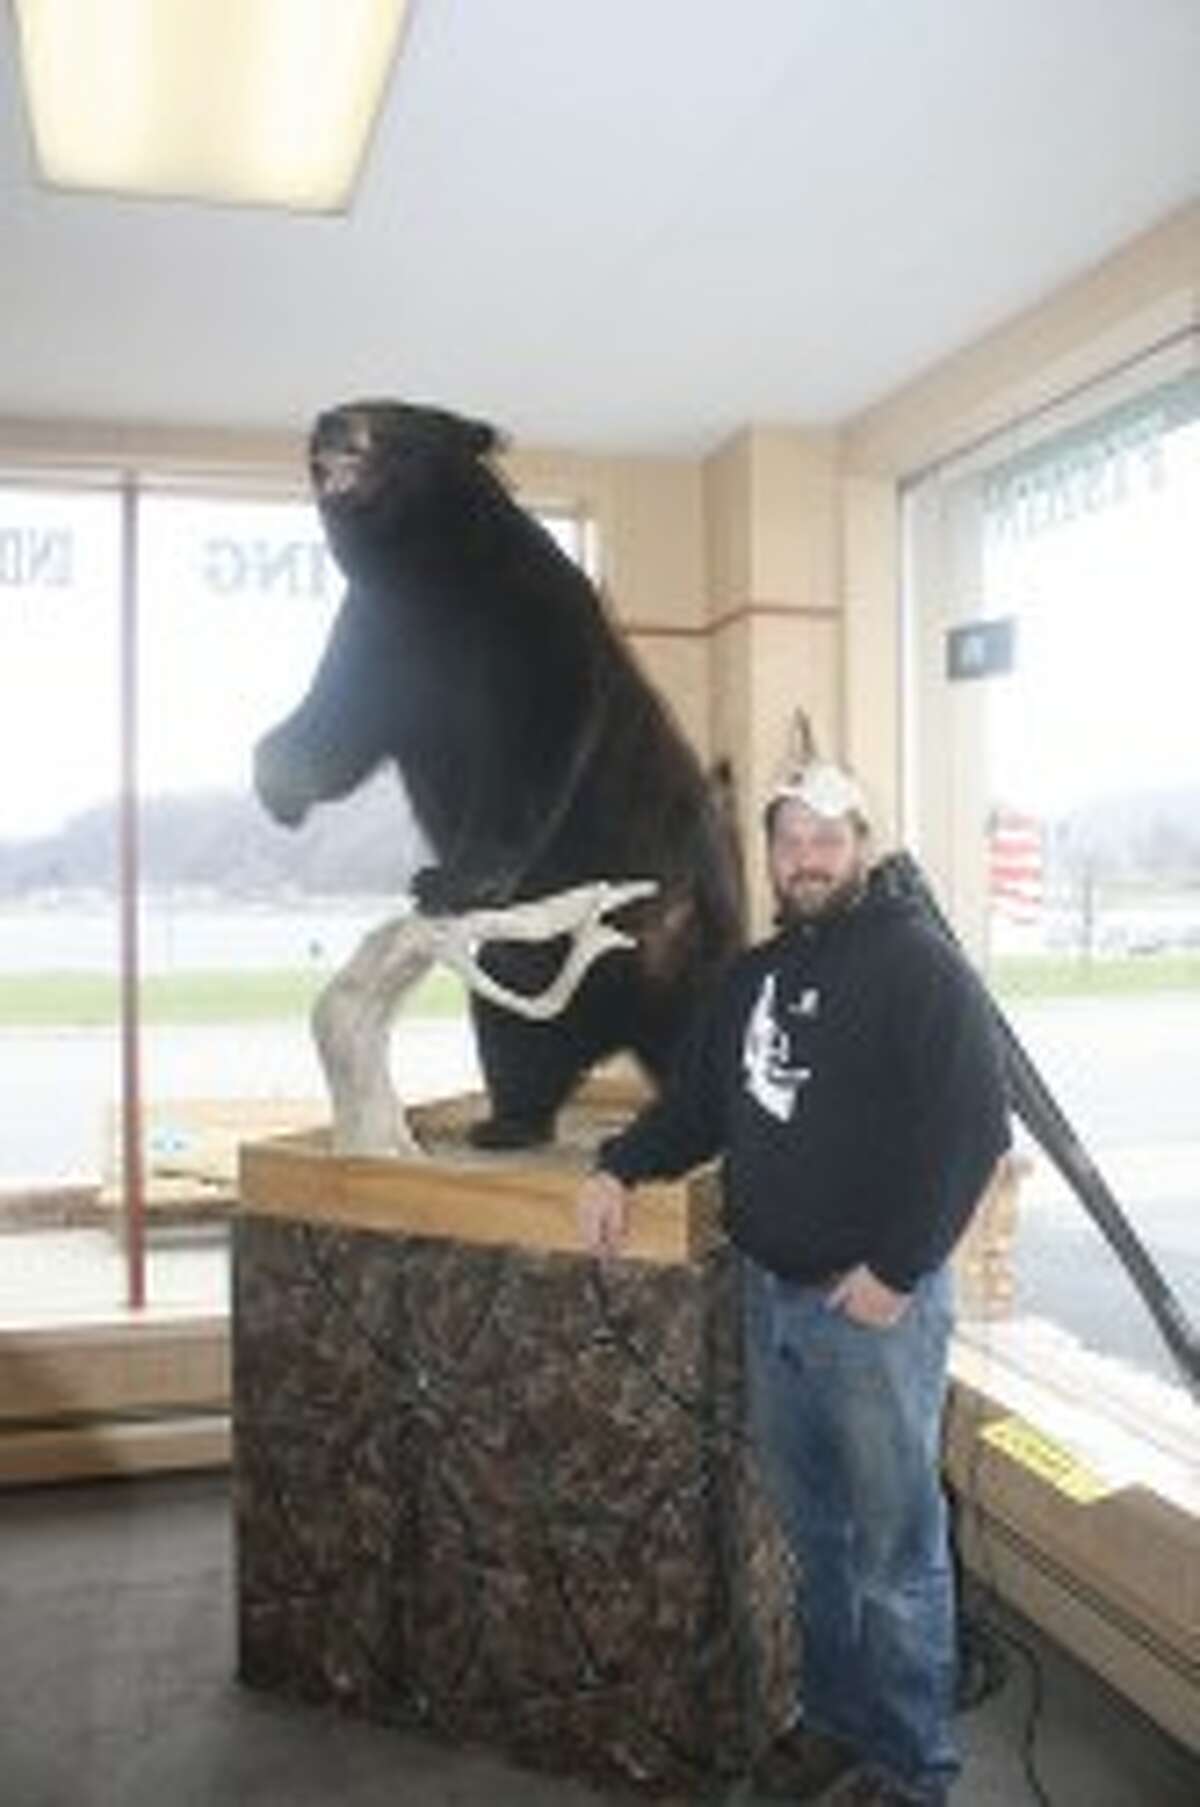 Jason Ware stands next to the 511-pound bear he shot in Ontario in 1998. (John Raffel/Pioneer News Network)